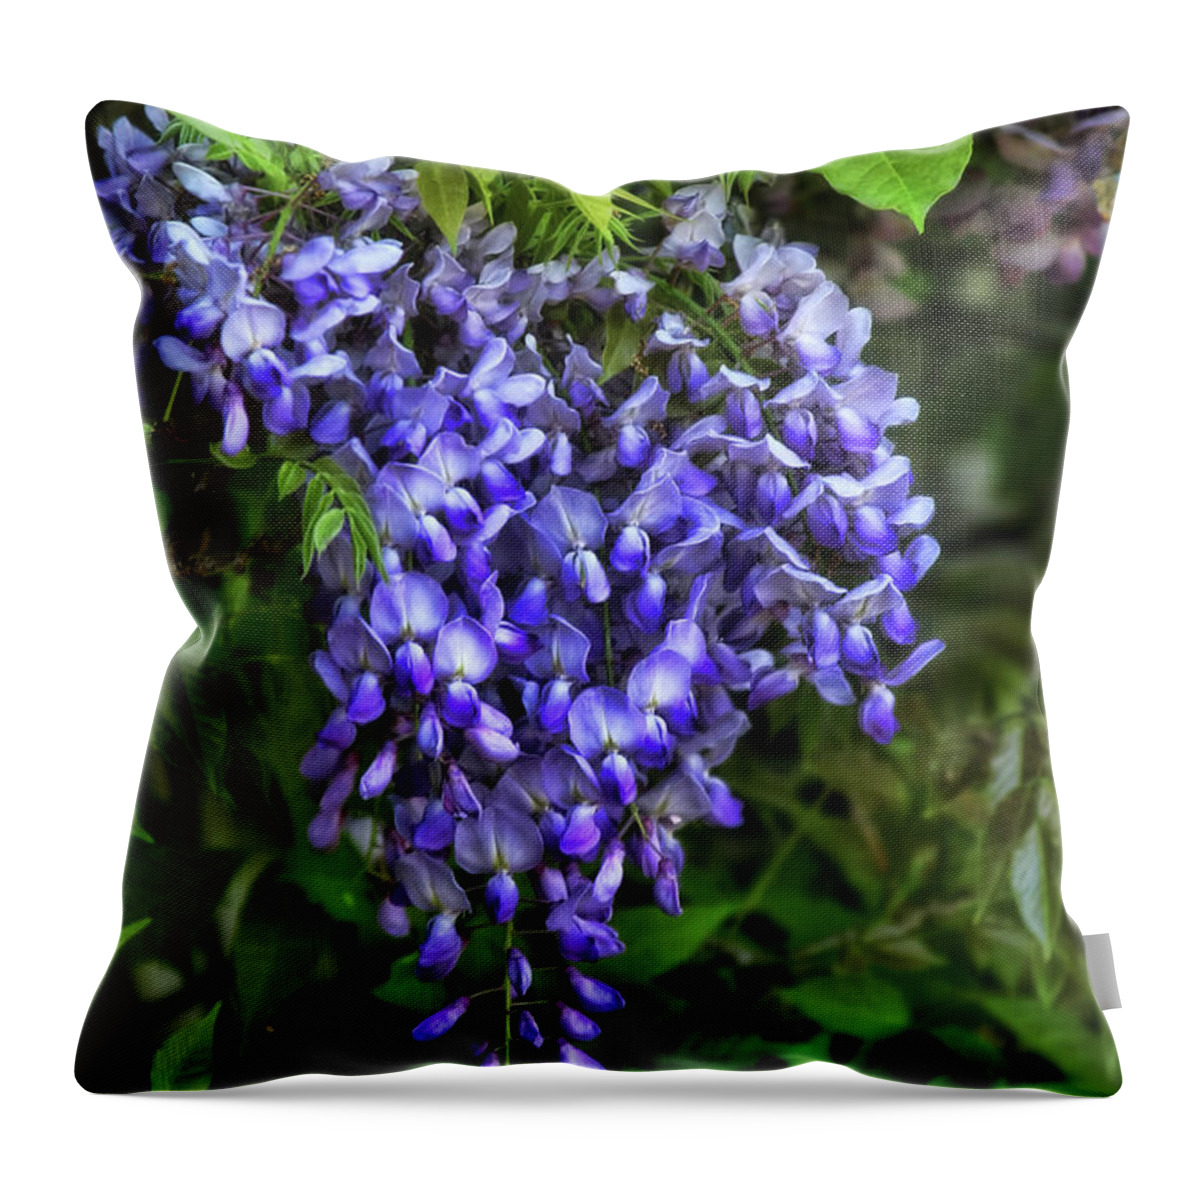 Wisteria Throw Pillow featuring the photograph Wisteria by Joan Bertucci